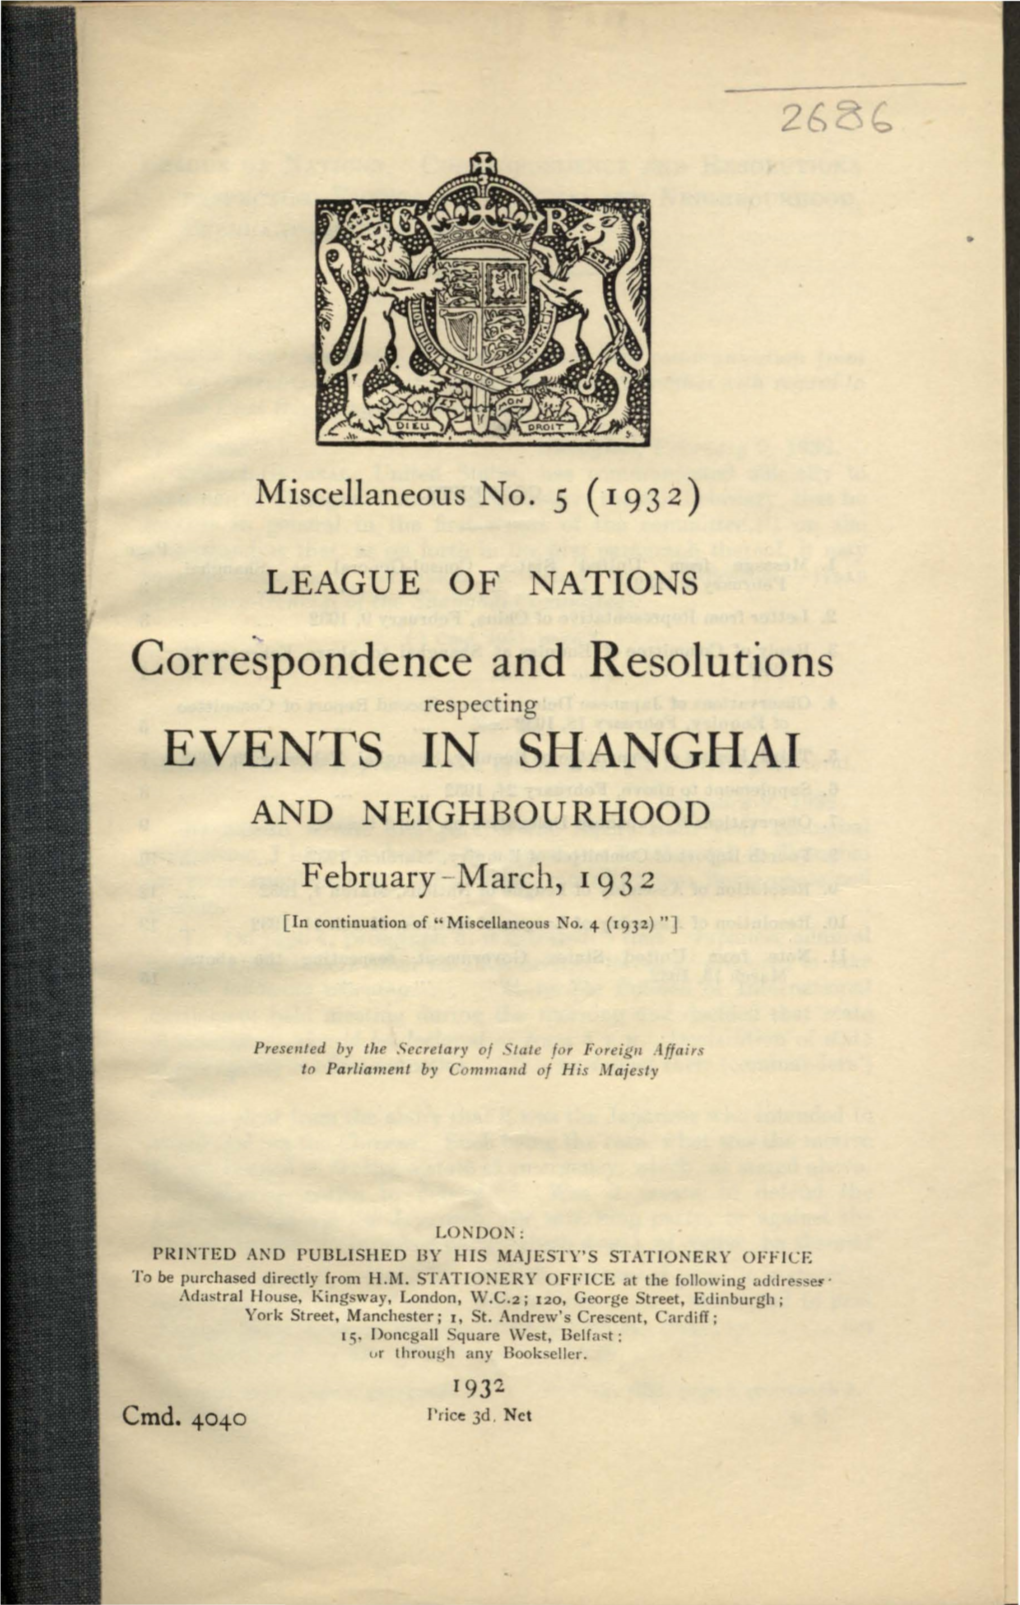 Correspondence and Resolutions Respecting Events in Shanghai and Neighbourhood February-March, 1932